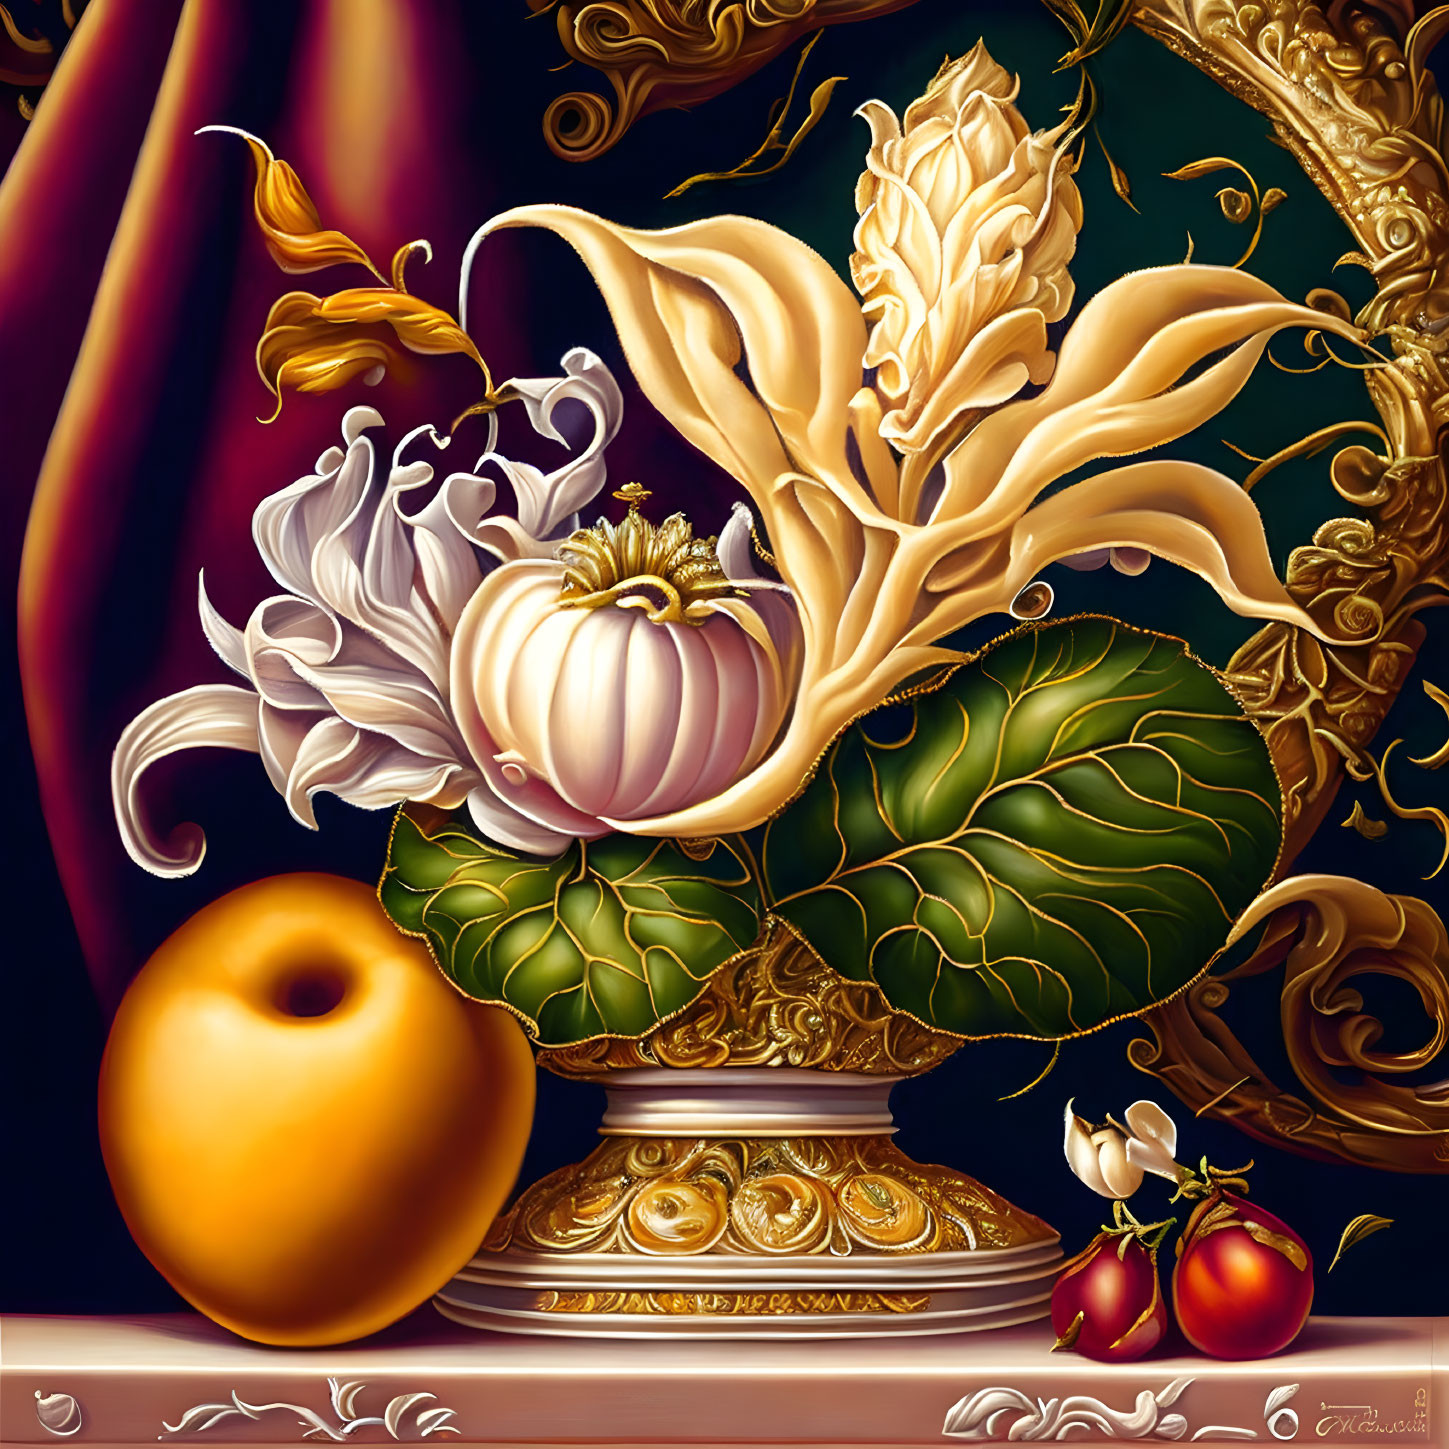 Colorful still life painting with golden frames, white flower, pumpkin, orange fruit, and red berries